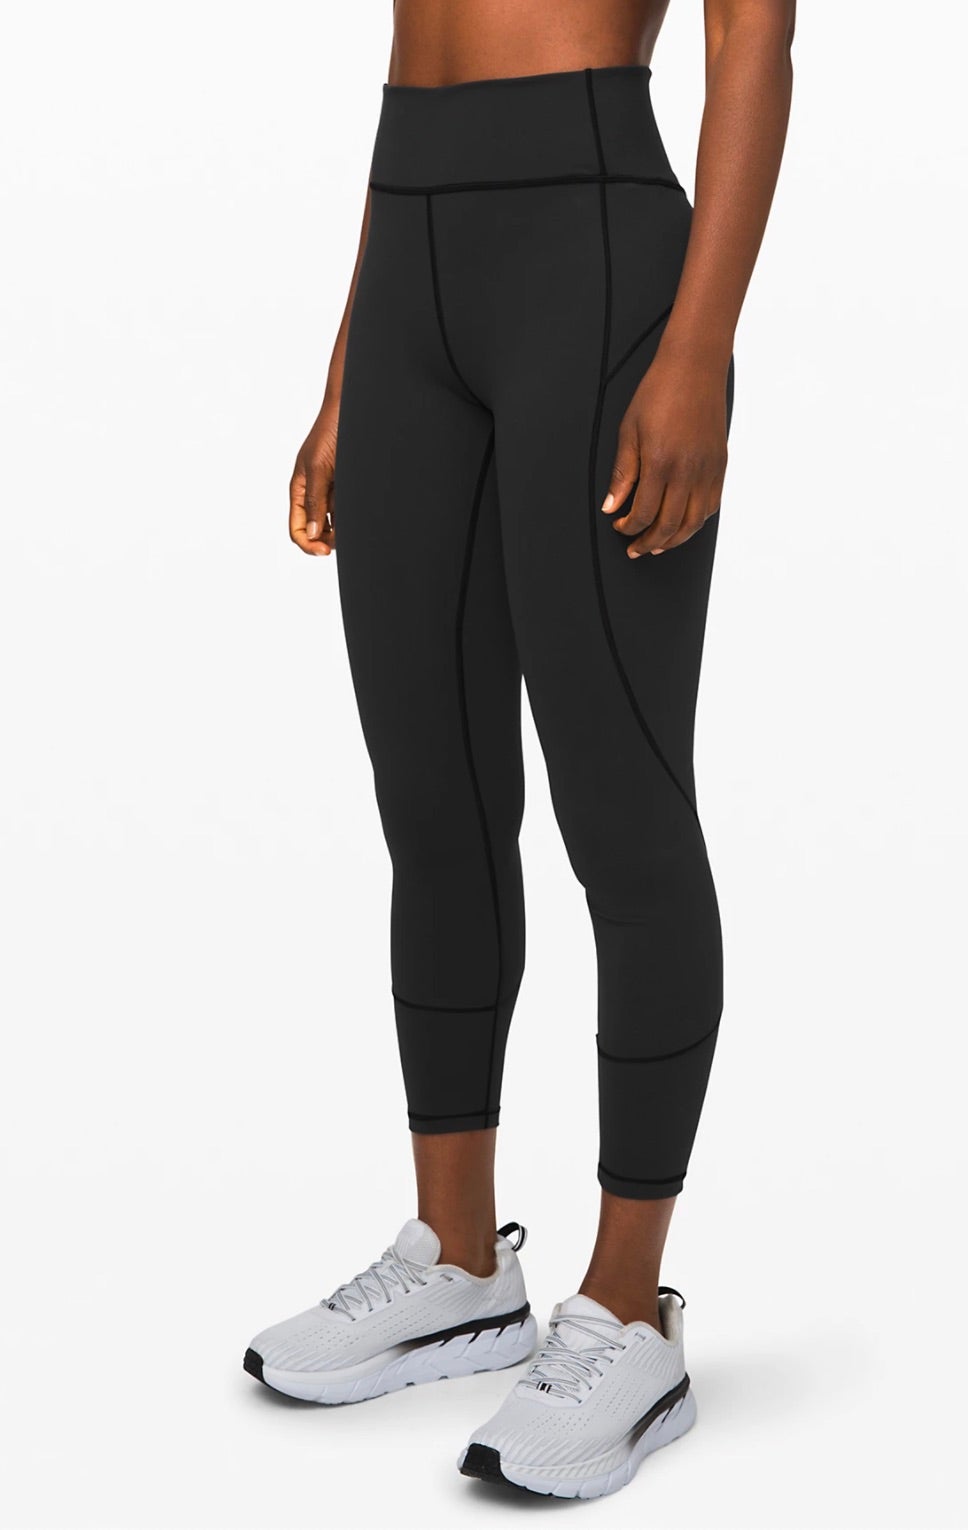 Lovearoundme - The Ultimate Guide To Shop The Best Lululemon Leggings